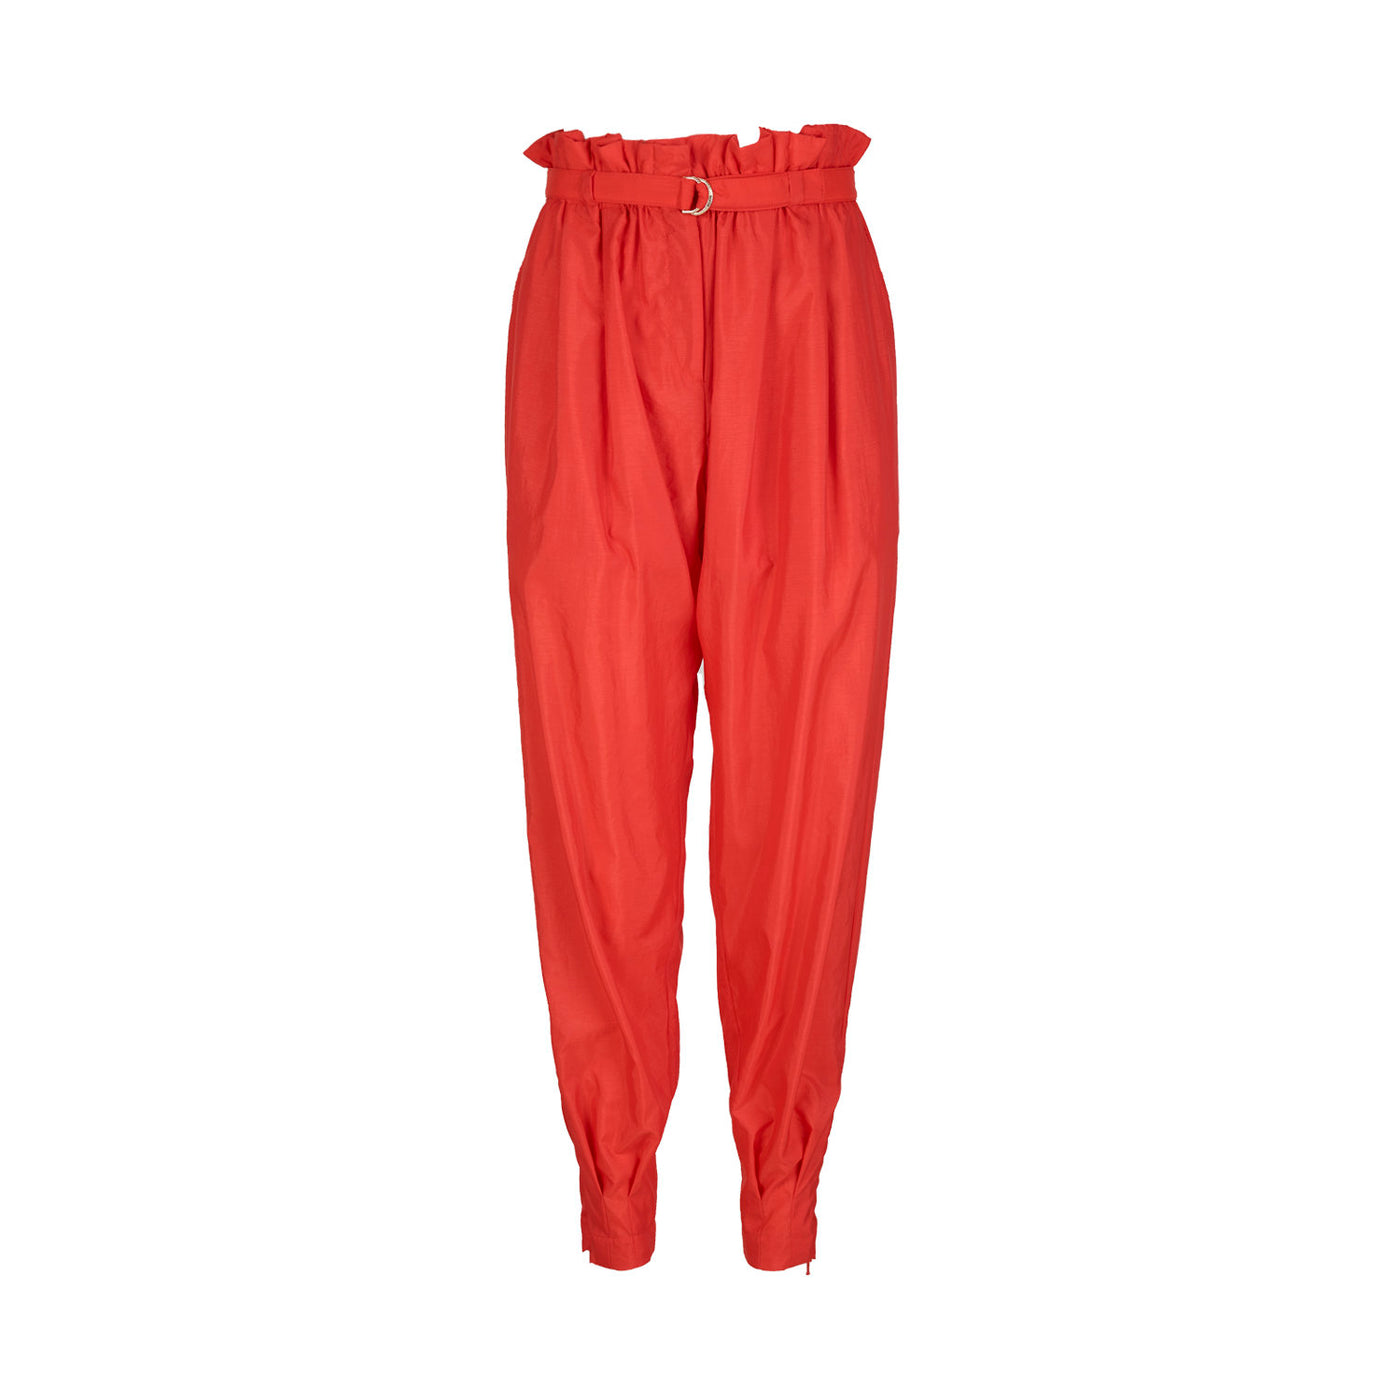 Orange Cargo Pants with Frill and Pleats with Belt